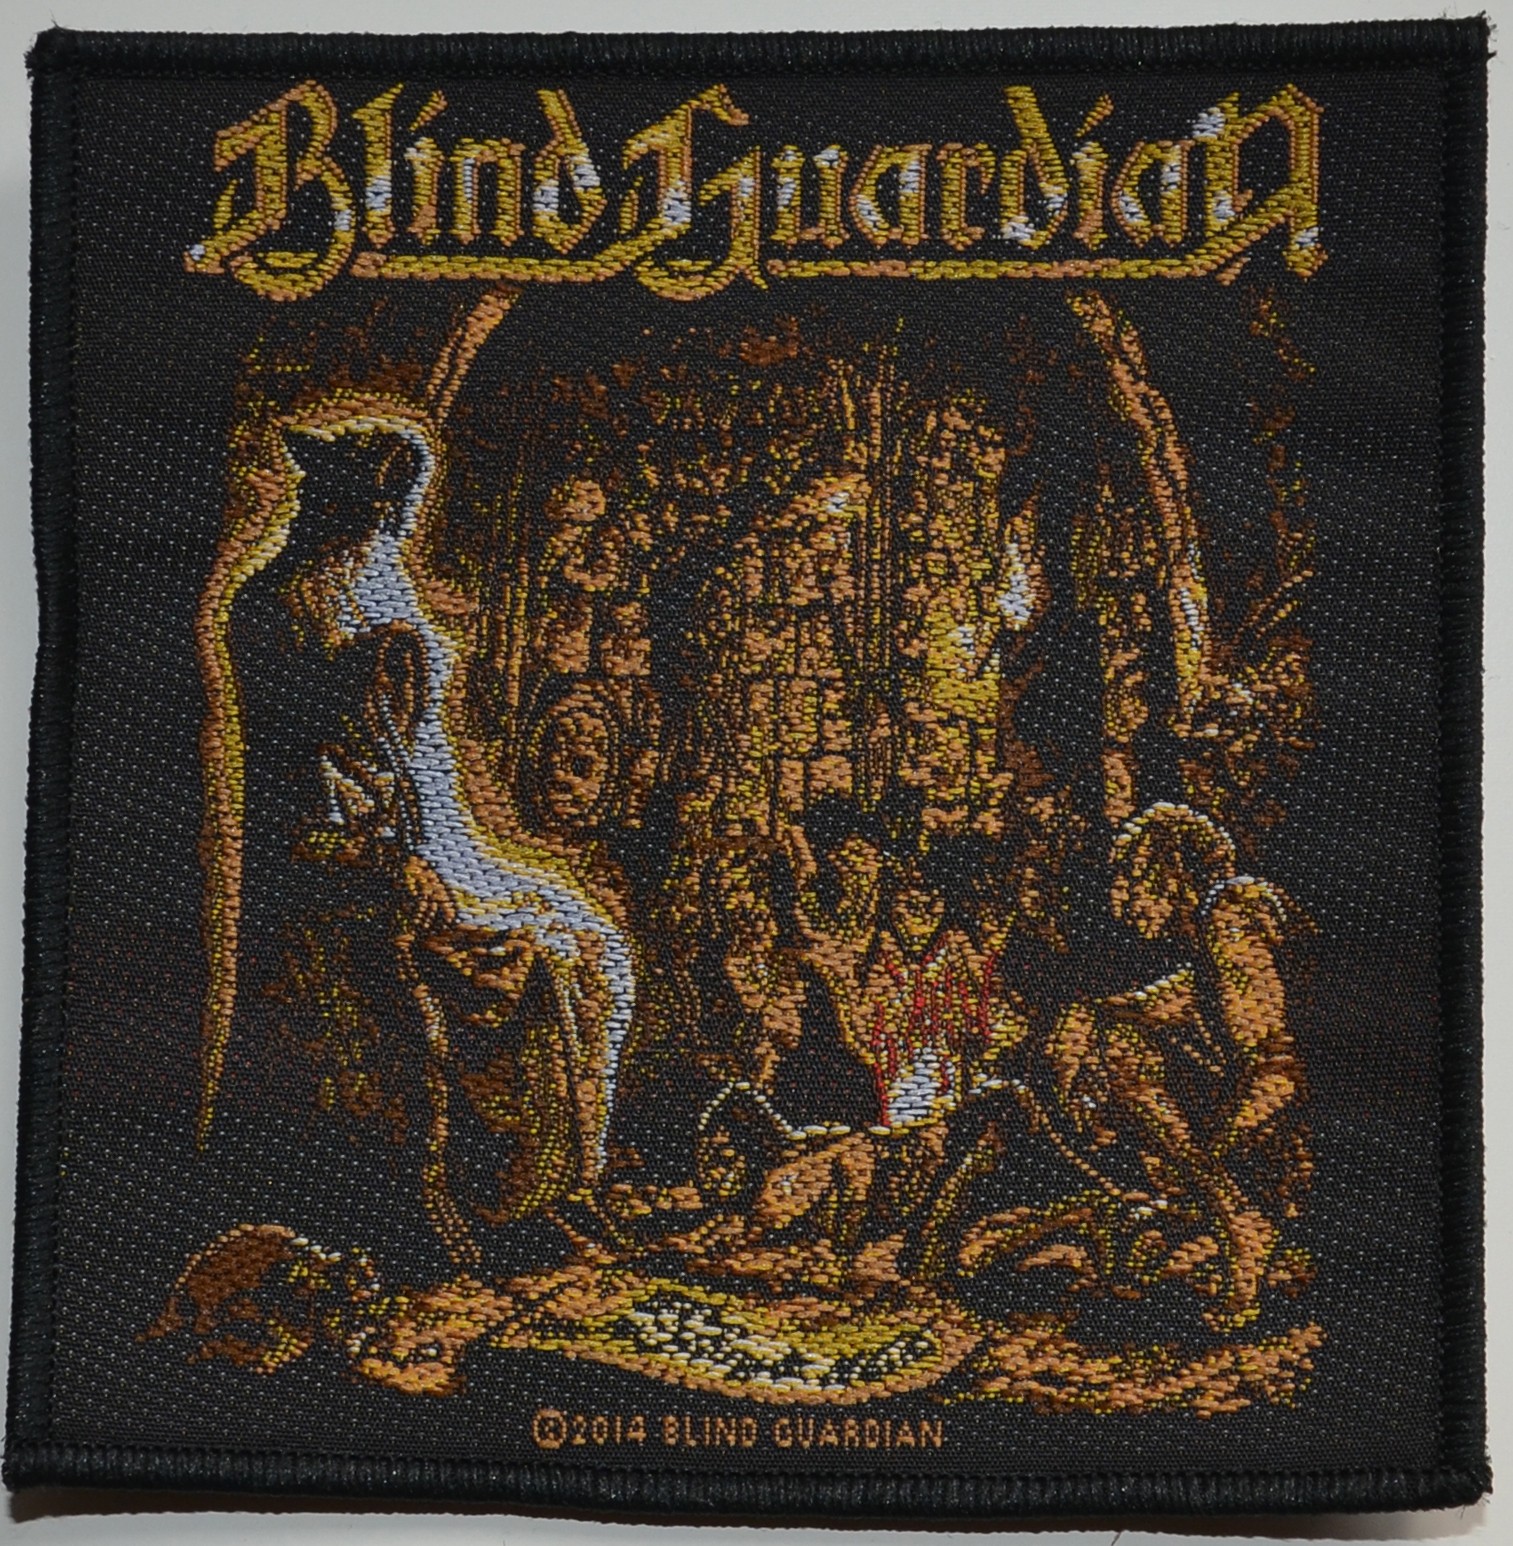 Blind Guardian - Tales From The Twilight